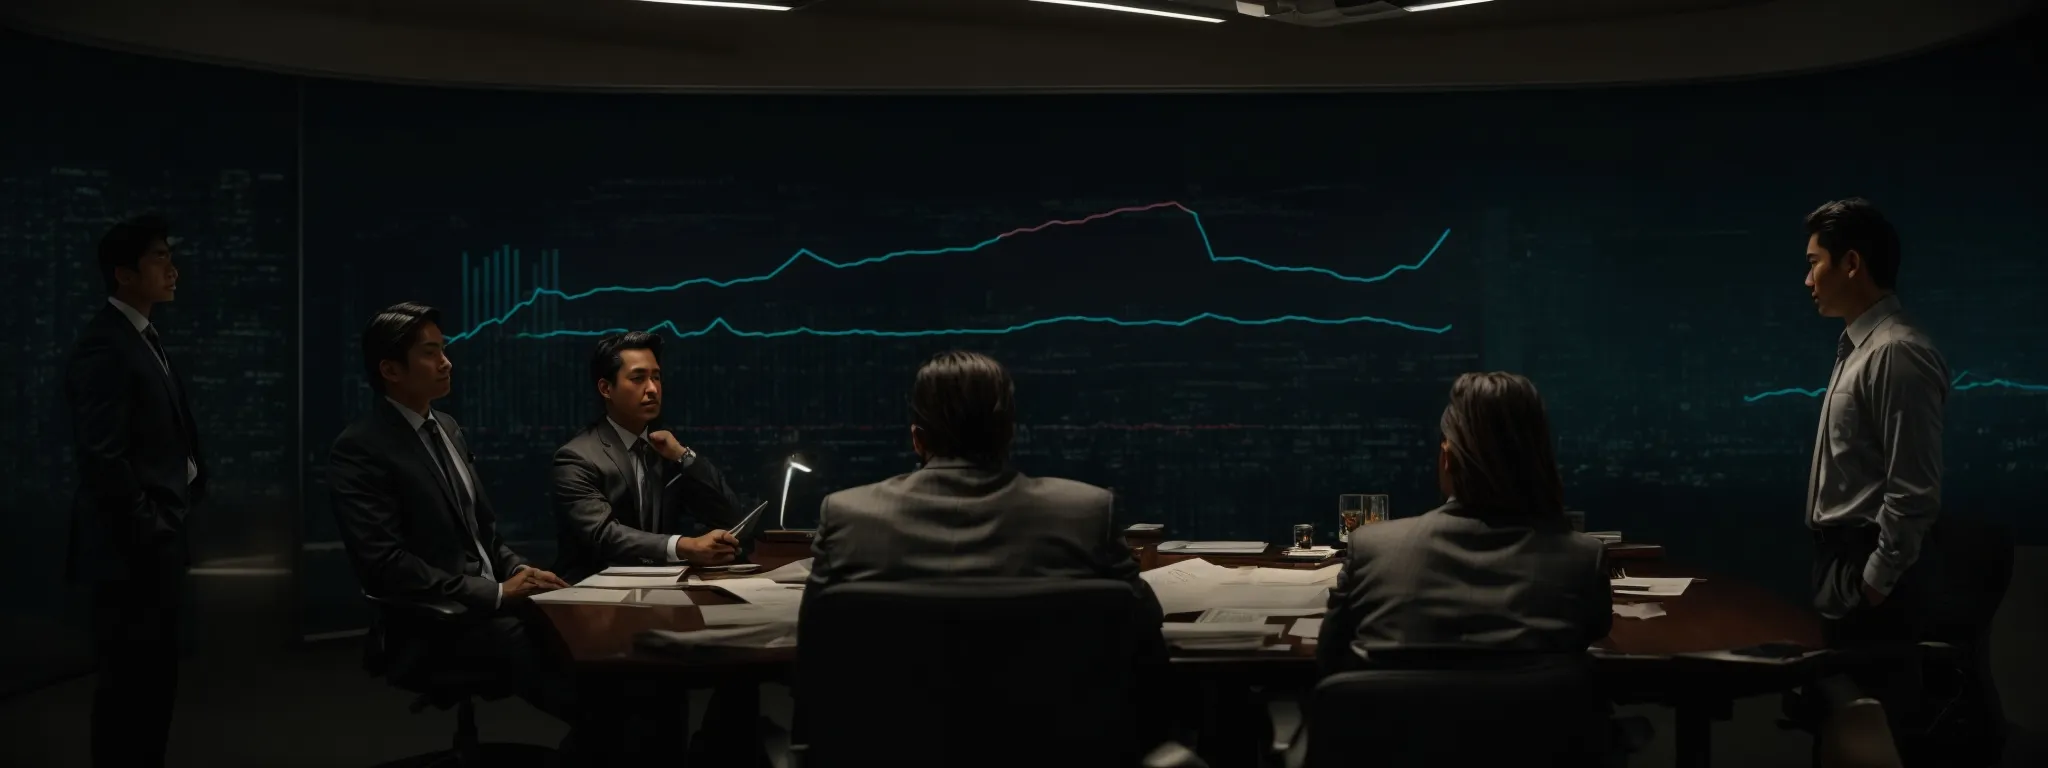  a dimly lit boardroom with a frustrated marketing team examining graphs on a large monitor.